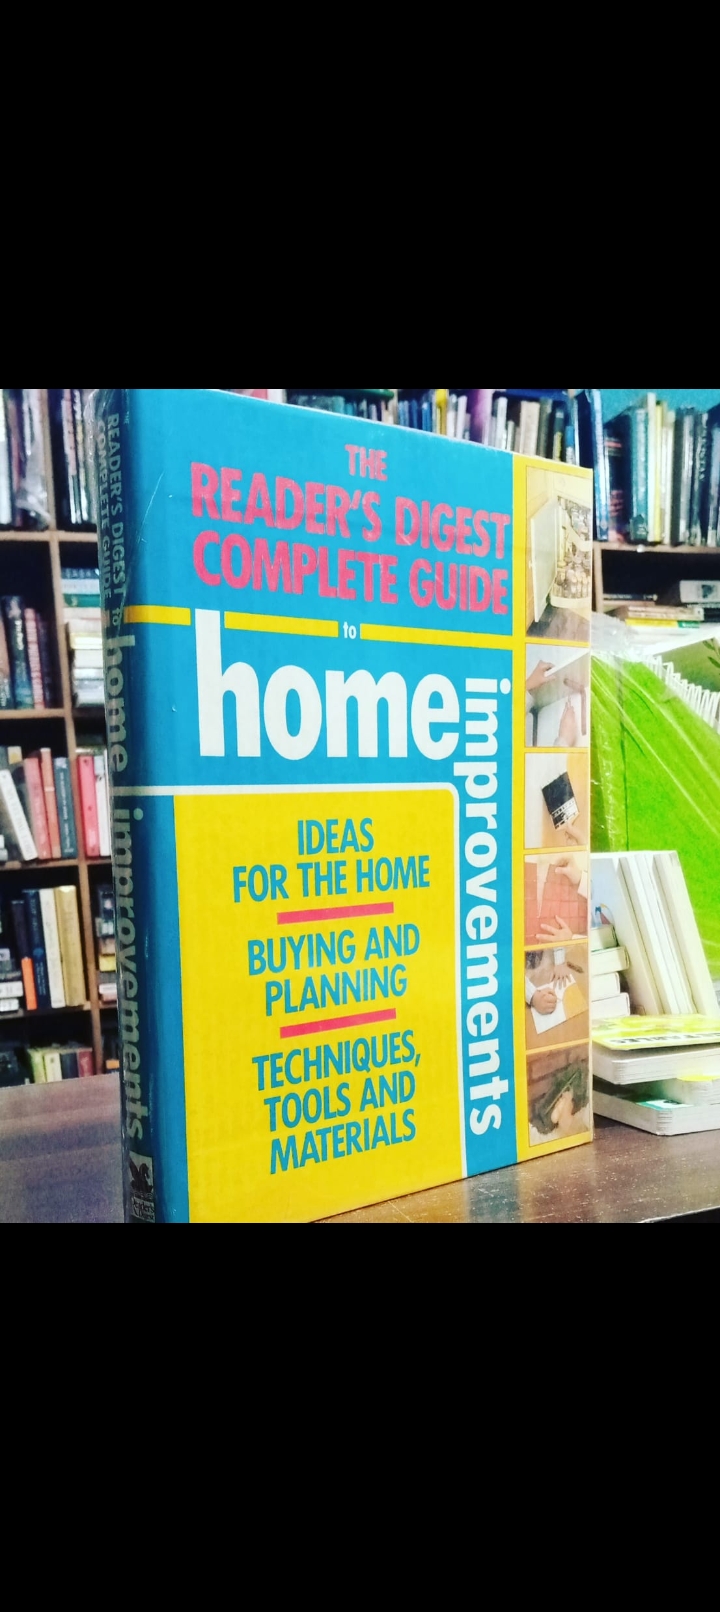 the reader's digest complete guide to home improvements. original large size coffee table book